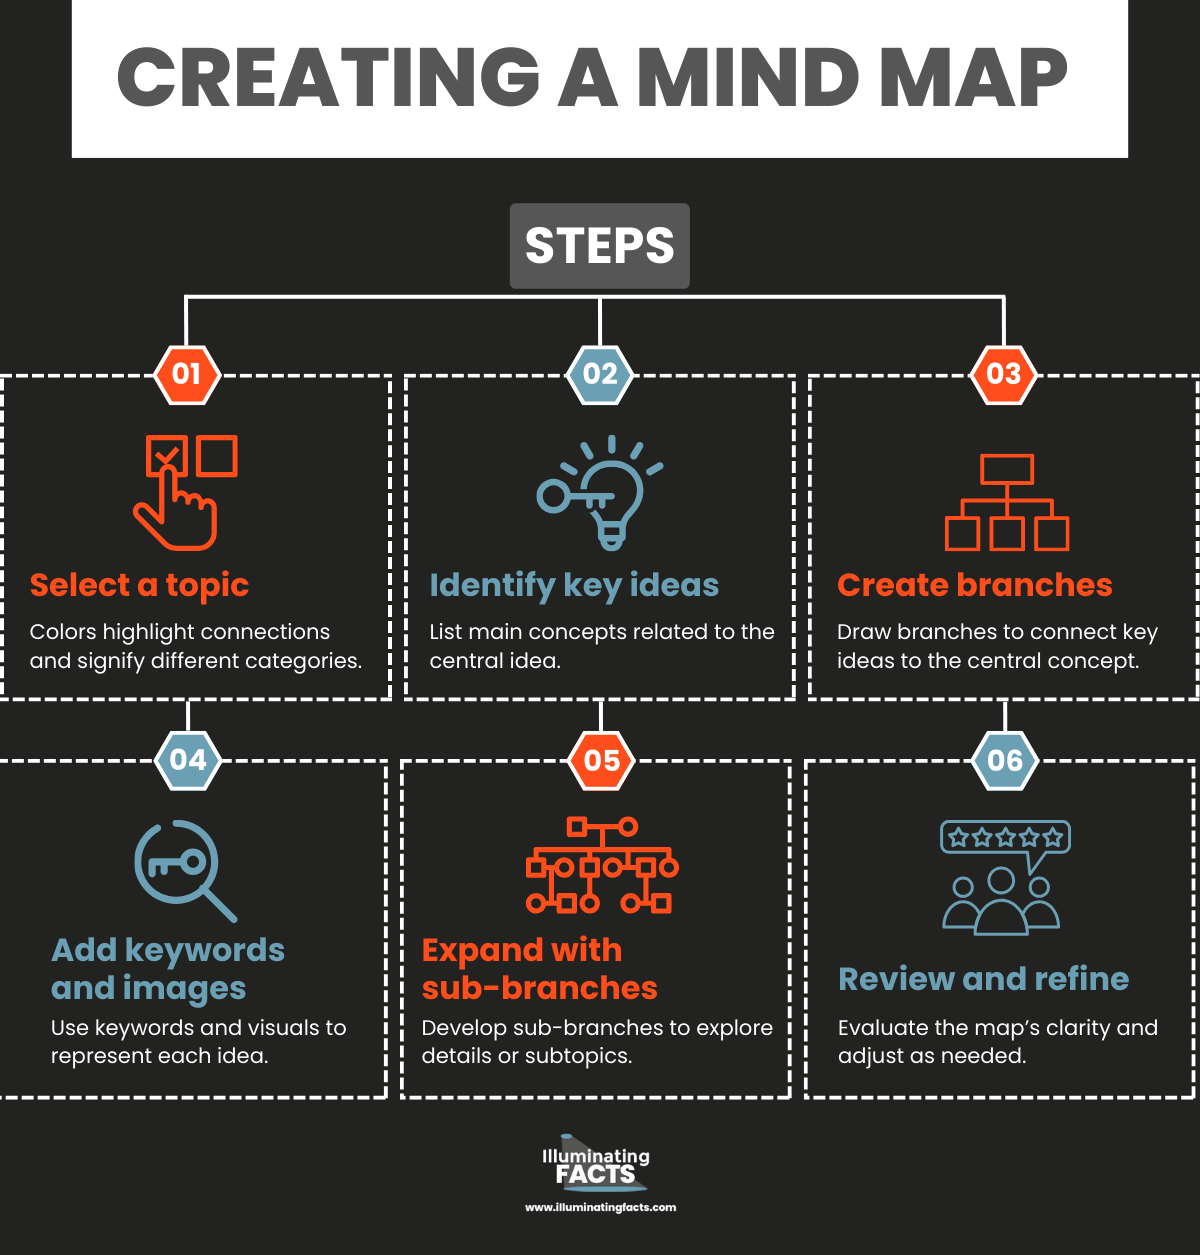 Creating a Mind Map